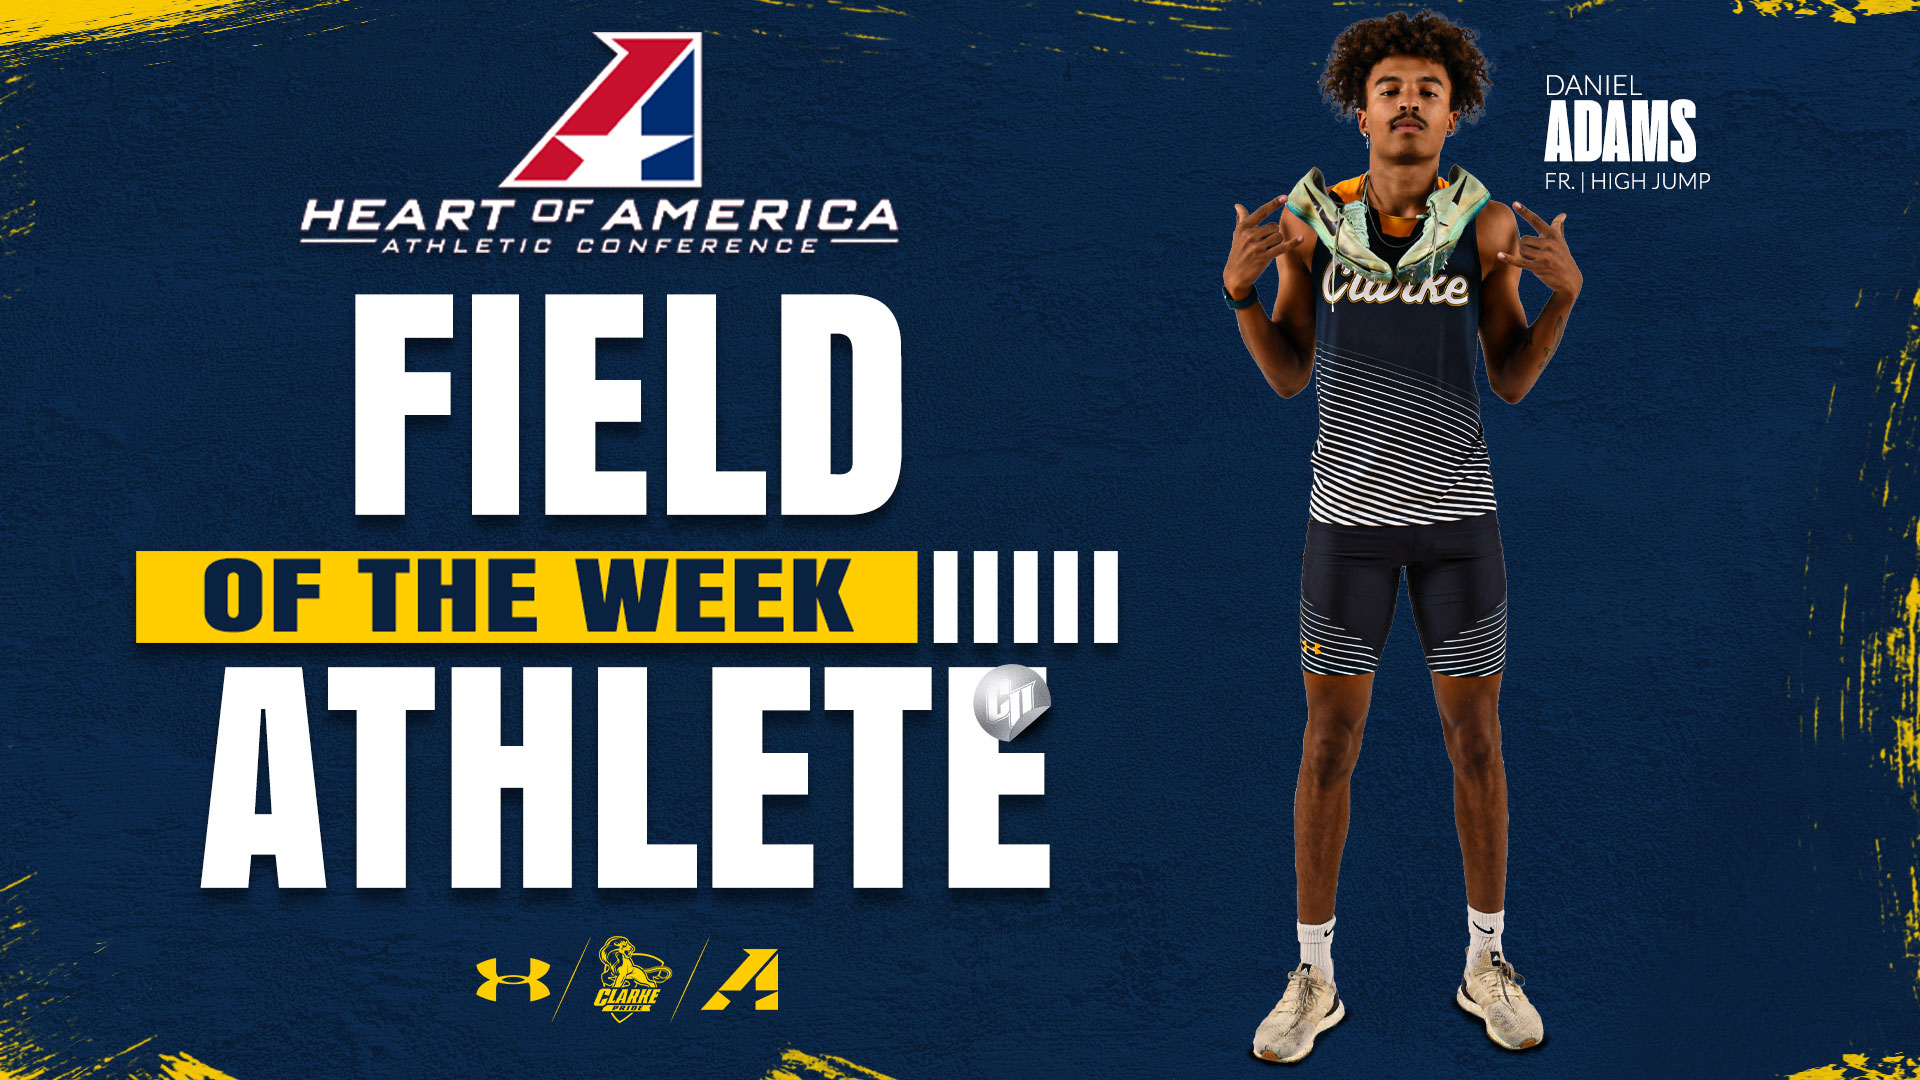 Quick start to outdoor season for Adams leads to Heart Field Athlete of the Week honor